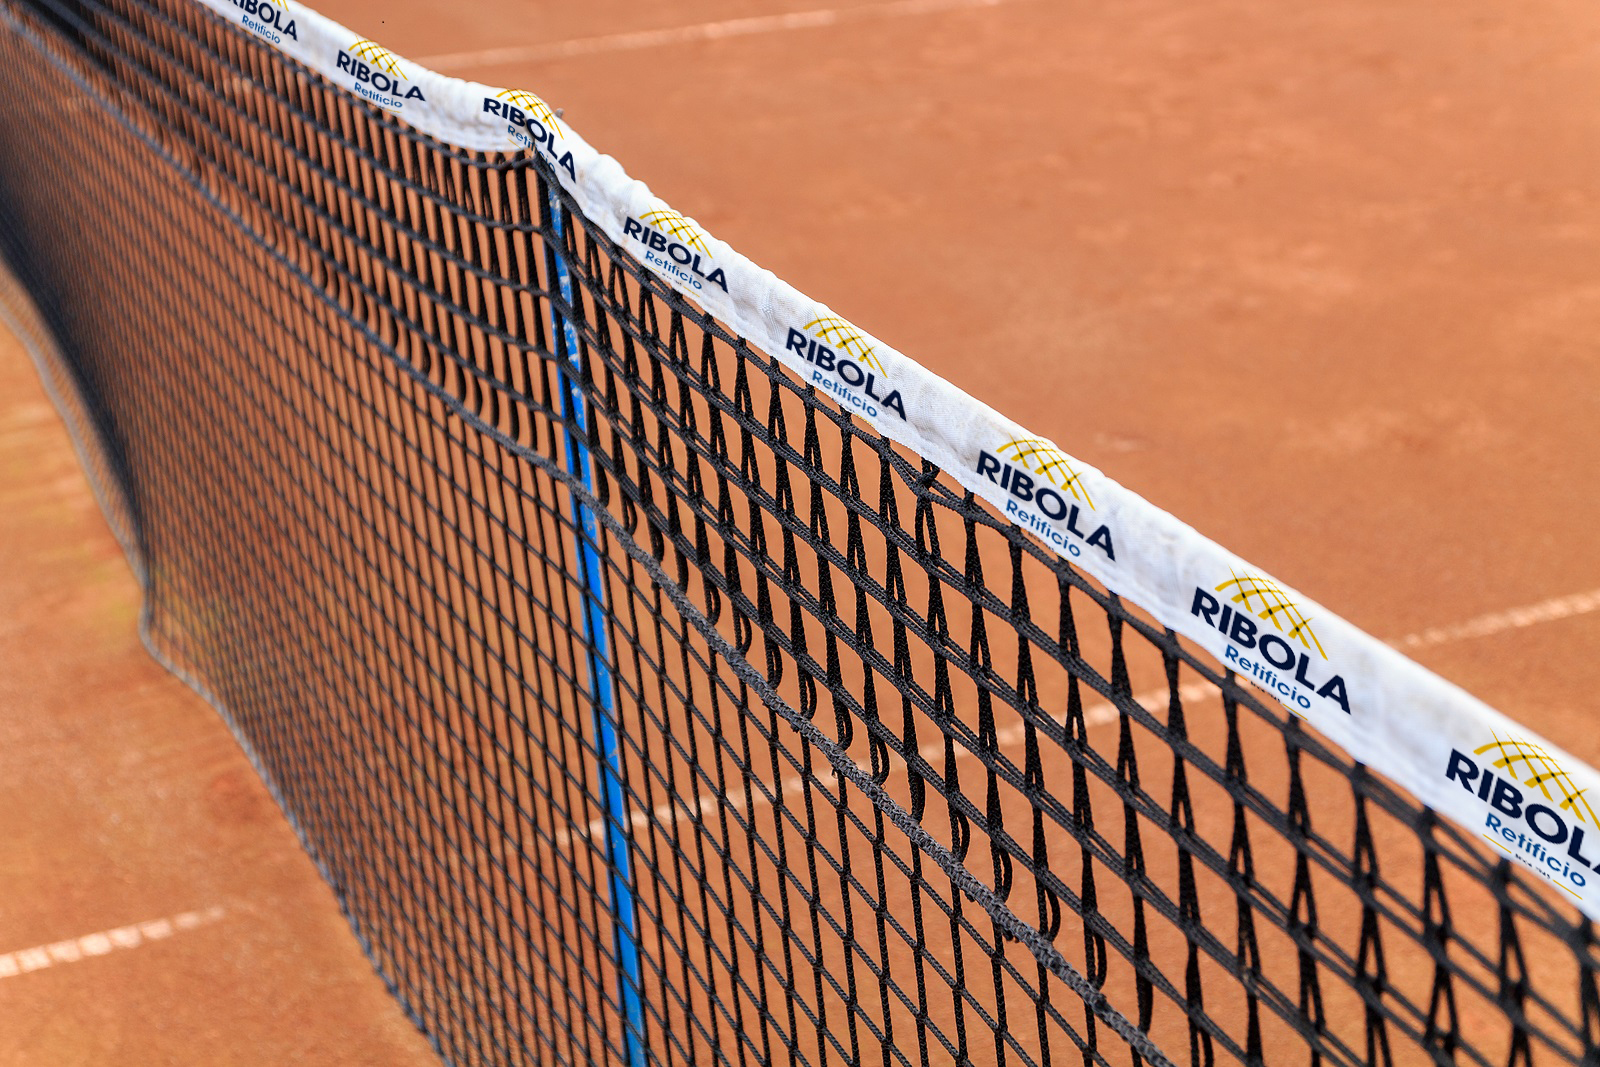 https://www.ribolanetting.com/storage/3166/Professional-tennis-net-with-personalized-print.webp